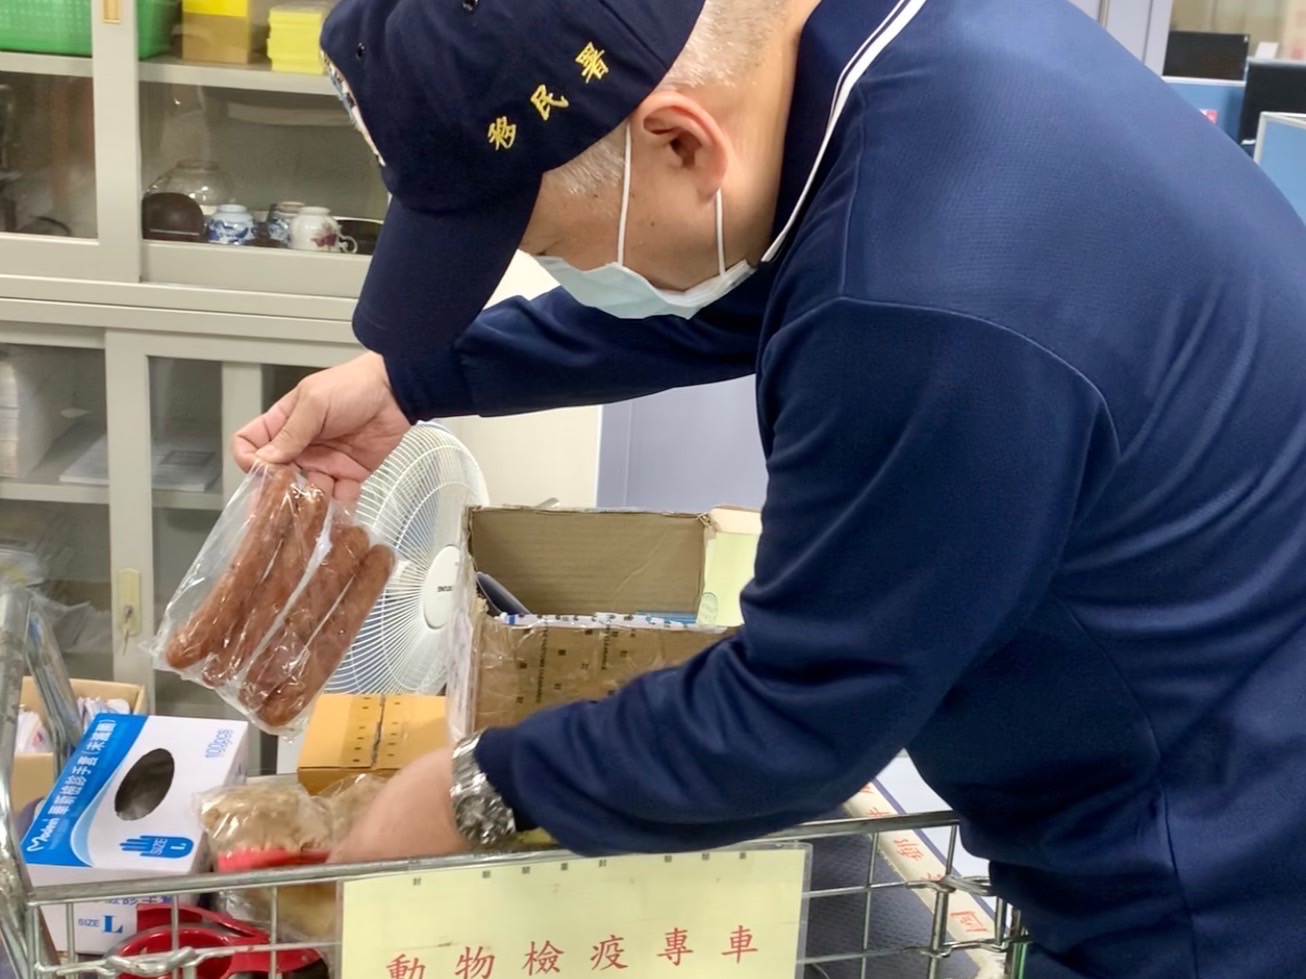 Kaohsiung Brigade was notified that African swine fever (ASF) virus was detected in a parcel sent from Thailand. (Photo / Provided by Kaohsiung Brigade)